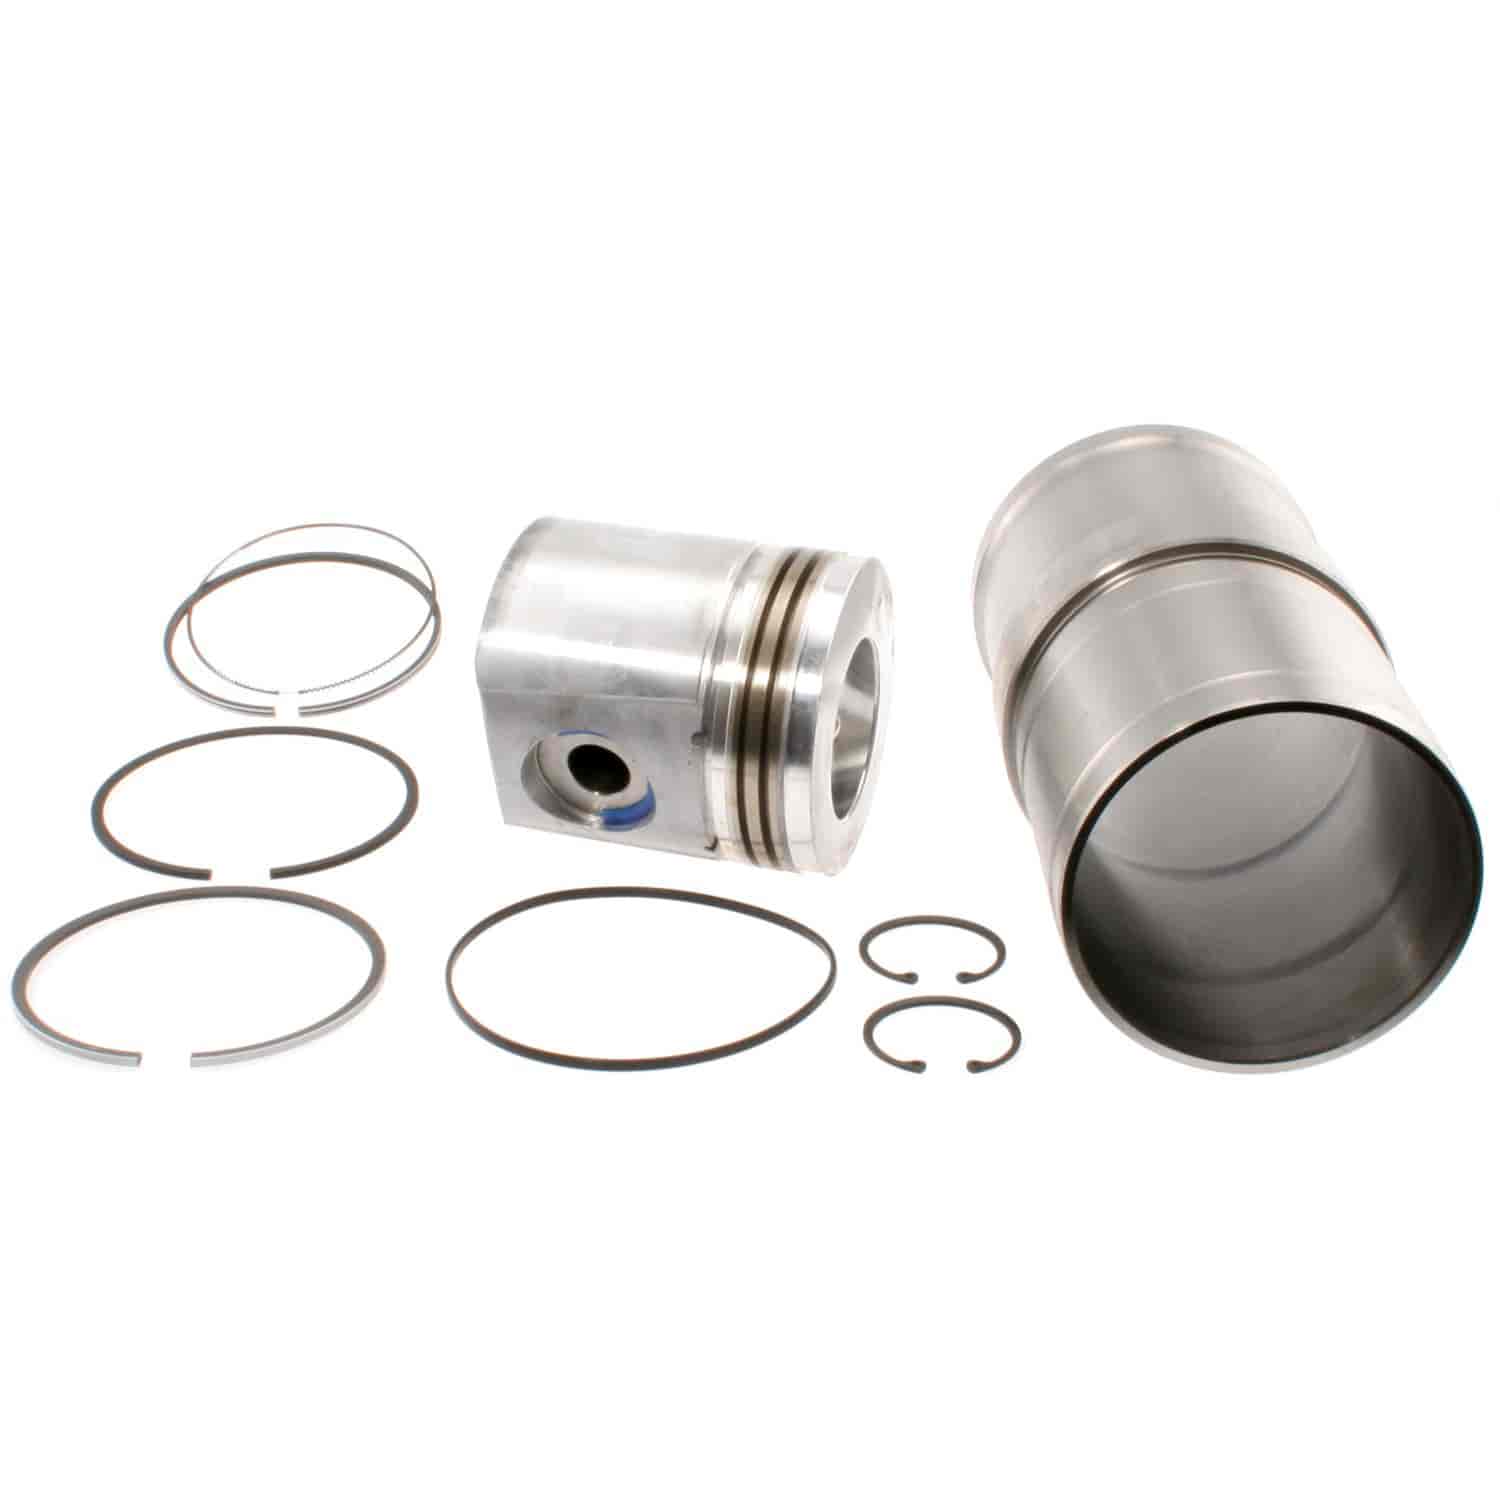 Cylinder Sleeve Assembly for Cummins C Series Diesel Engines Block Casting 3928962 1991 to 1/4/1998